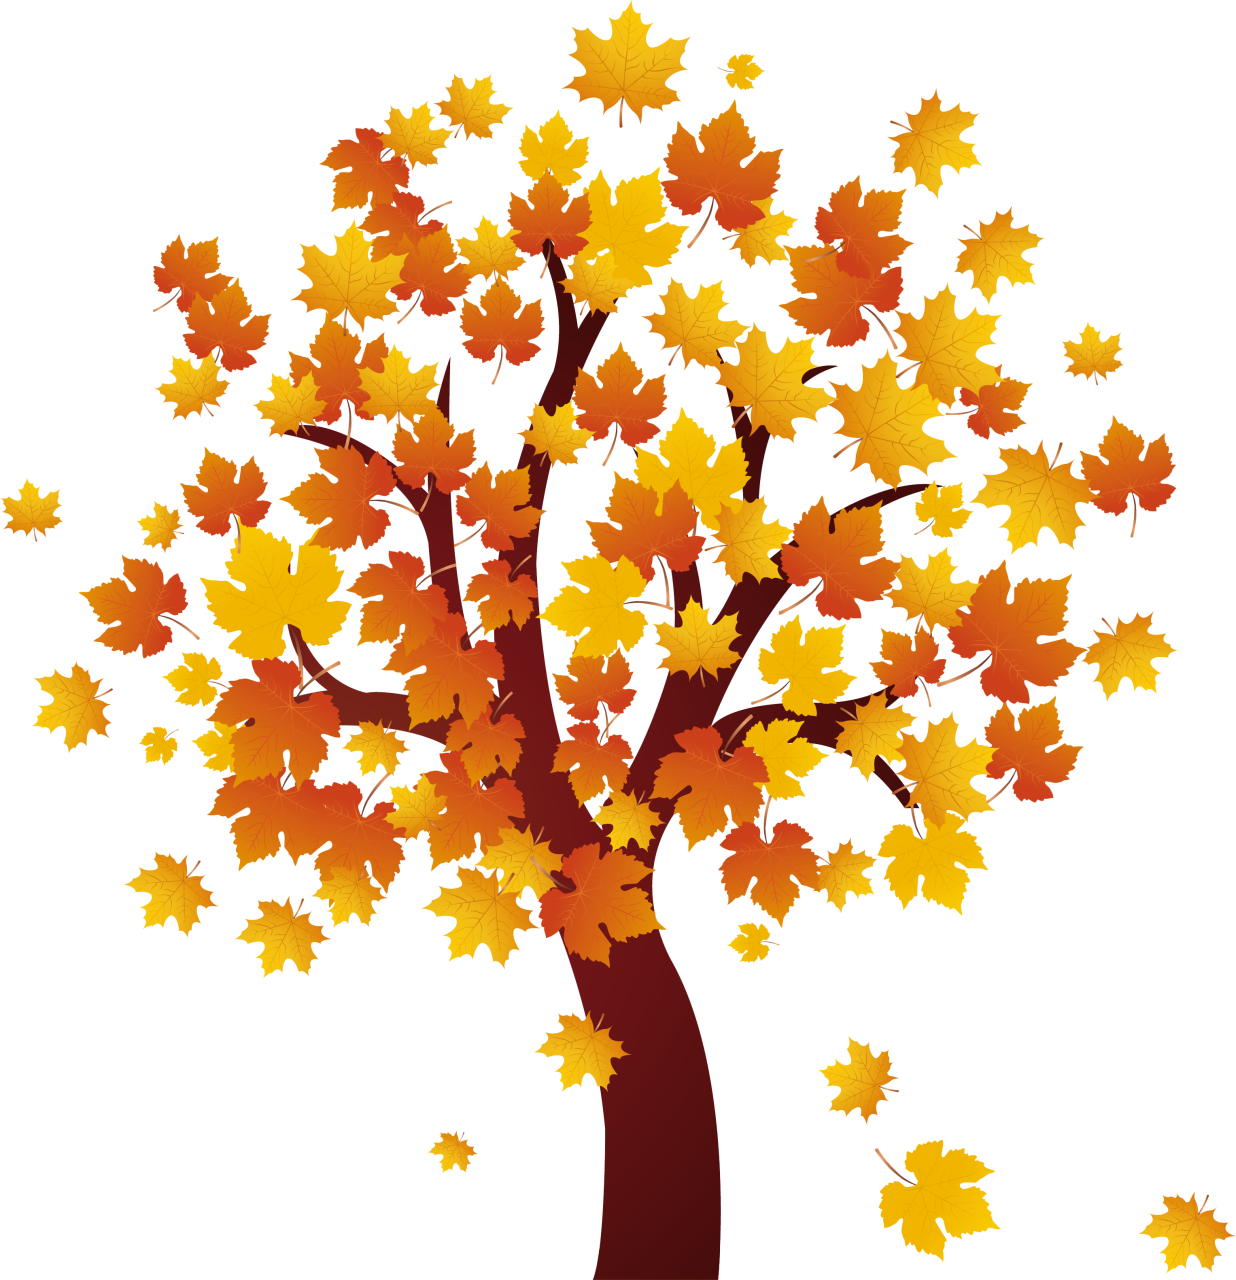 That Others image has been removed at the request of its copyright owner. fall tree clipart. Free Clipart Of Fall Trees